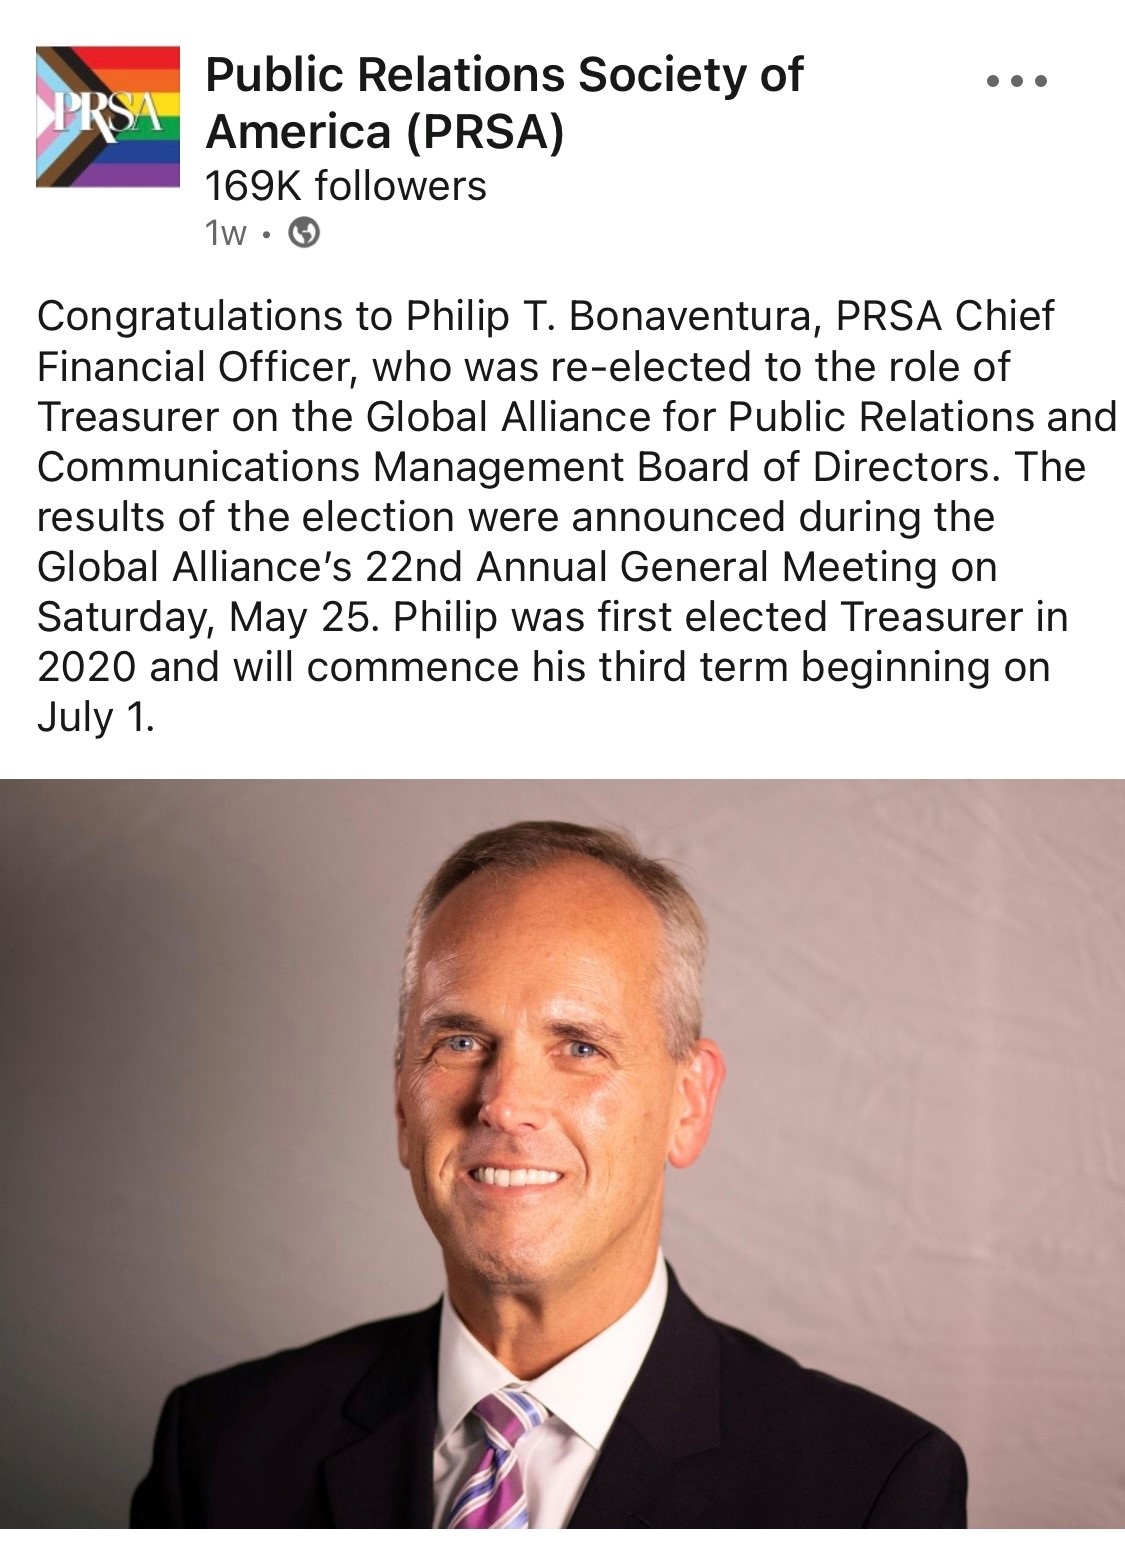 PRSA and the Global Alliance are allowing one person to control finances of both organizations, which do business with one another.